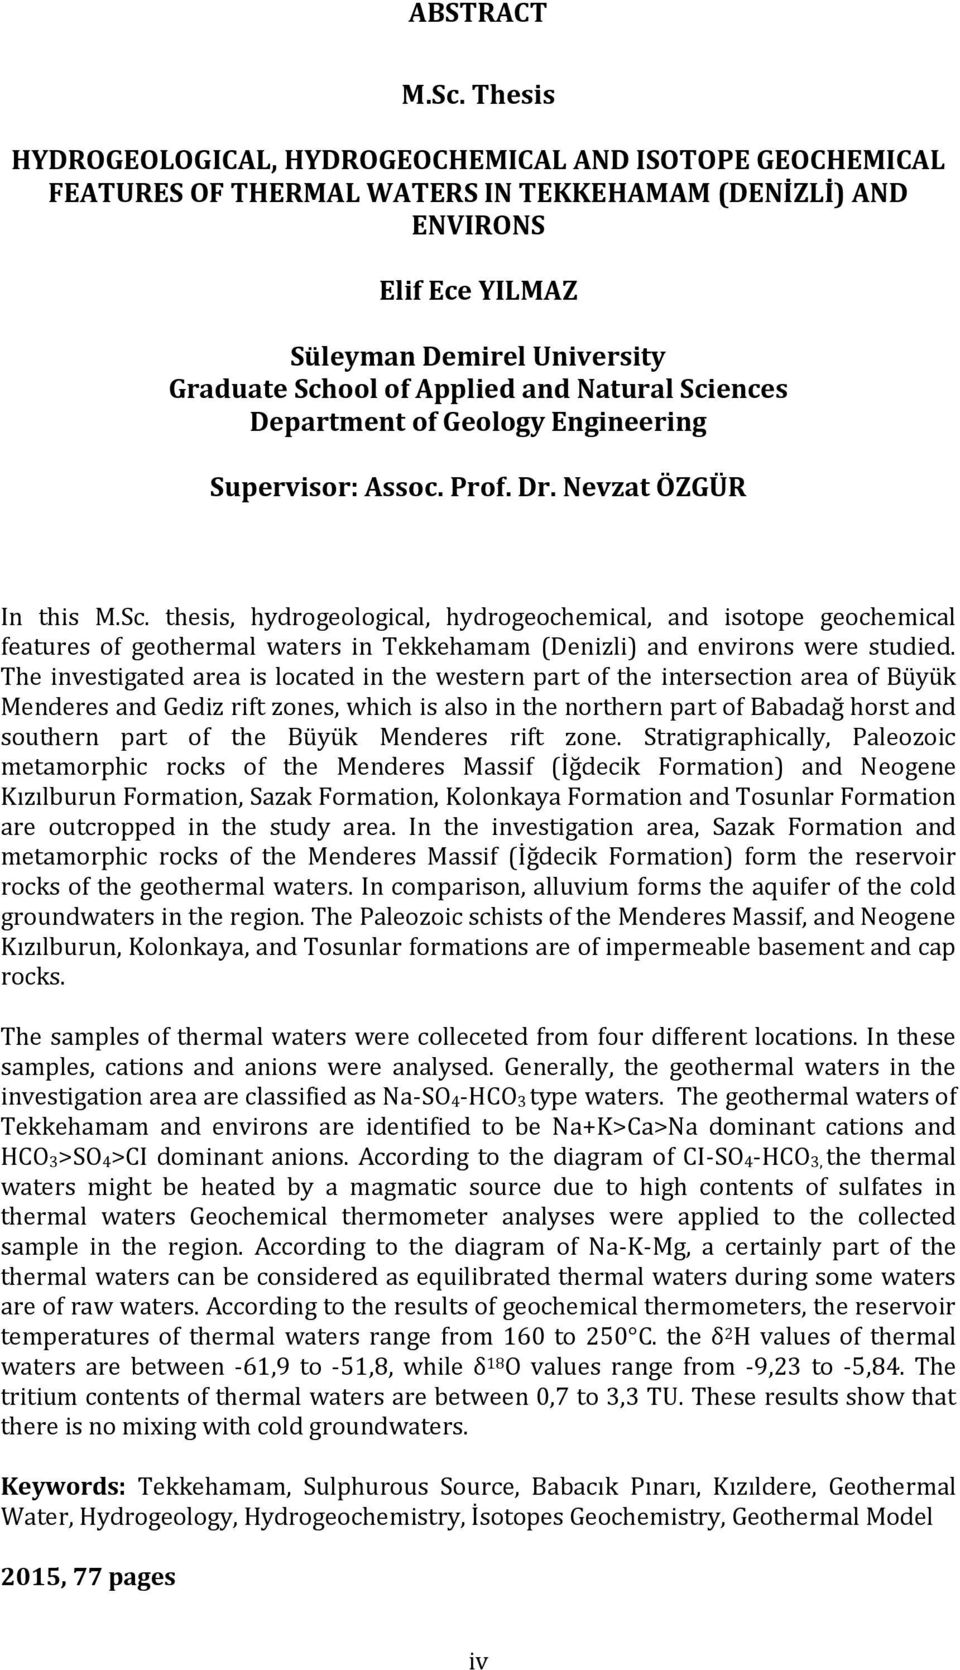 and Natural Sciences Department of Geology Engineering Supervisor: Assoc. Prof. Dr. Nevzat ÖZGÜR In this M.Sc. thesis, hydrogeological, hydrogeochemical, and isotope geochemical features of geothermal waters in Tekkehamam (Denizli) and environs were studied.